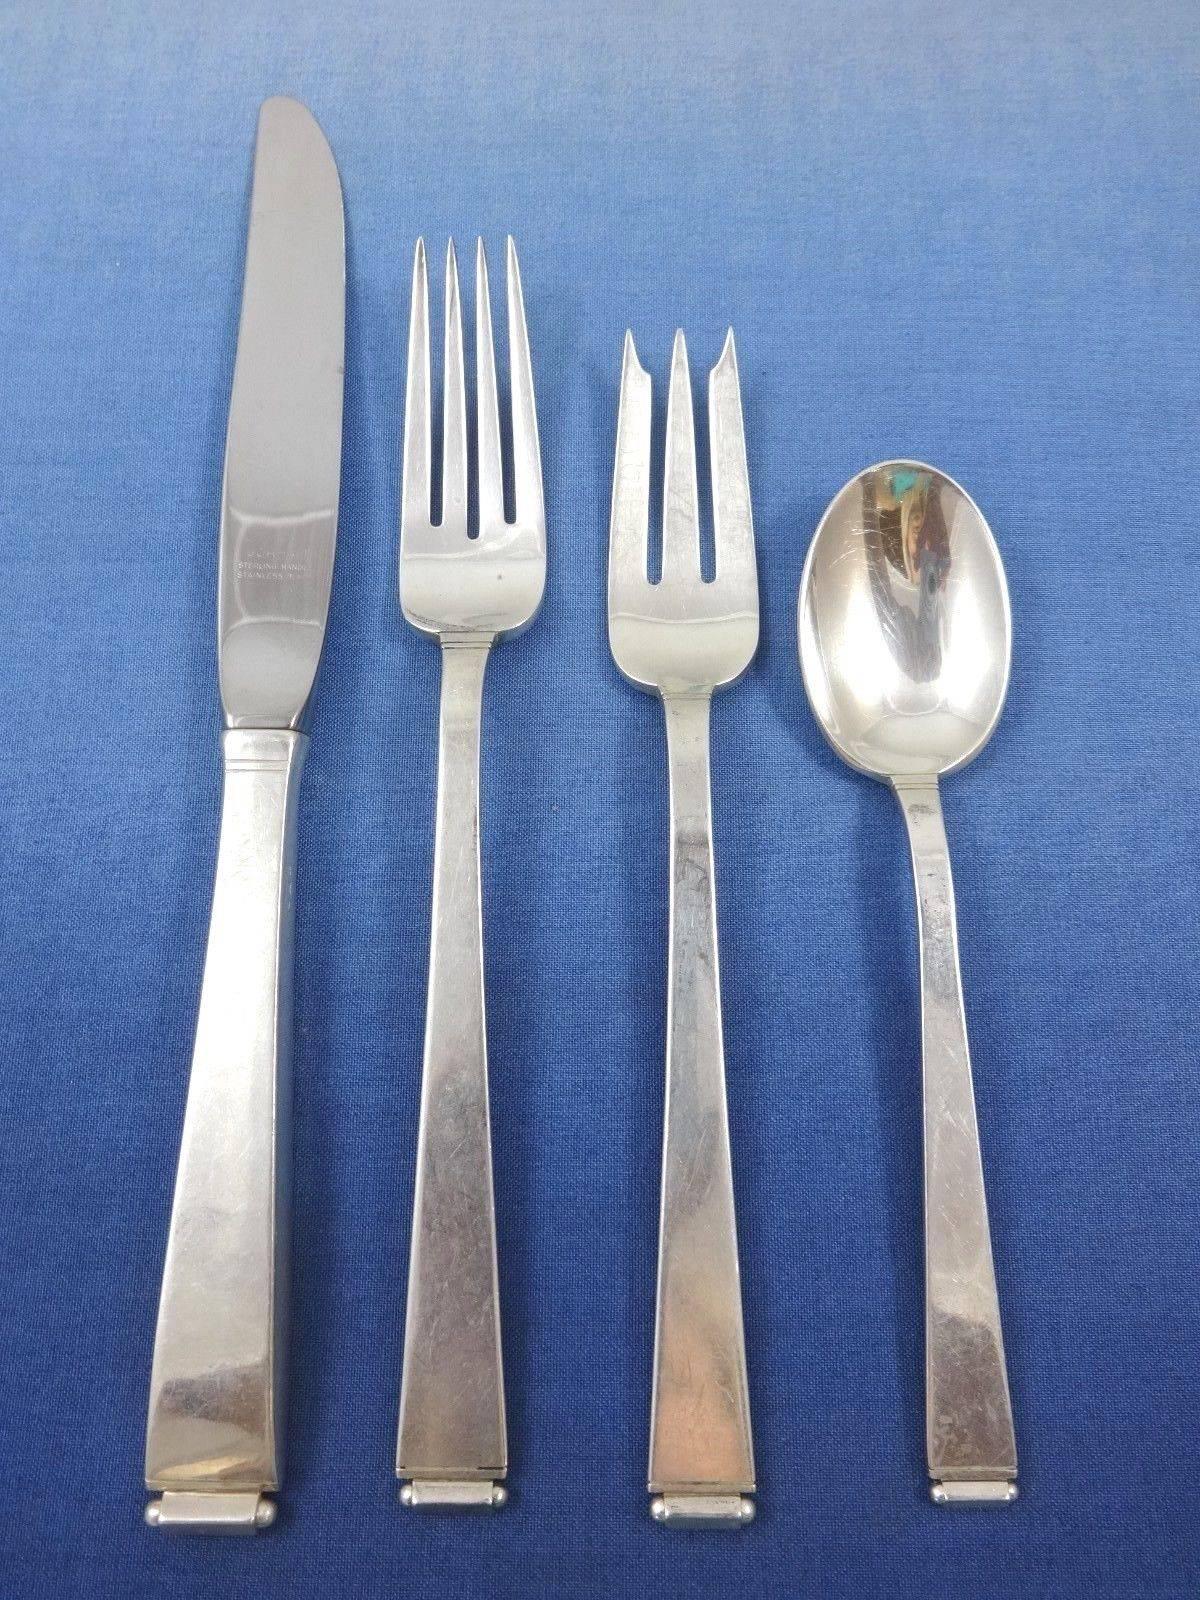 Unique Perspective by Gorham sterling silver flatware set of 59 pieces. This is a great looking Scarce modern design pattern with clean lines. This set includes:

Six knives, 9 3/8